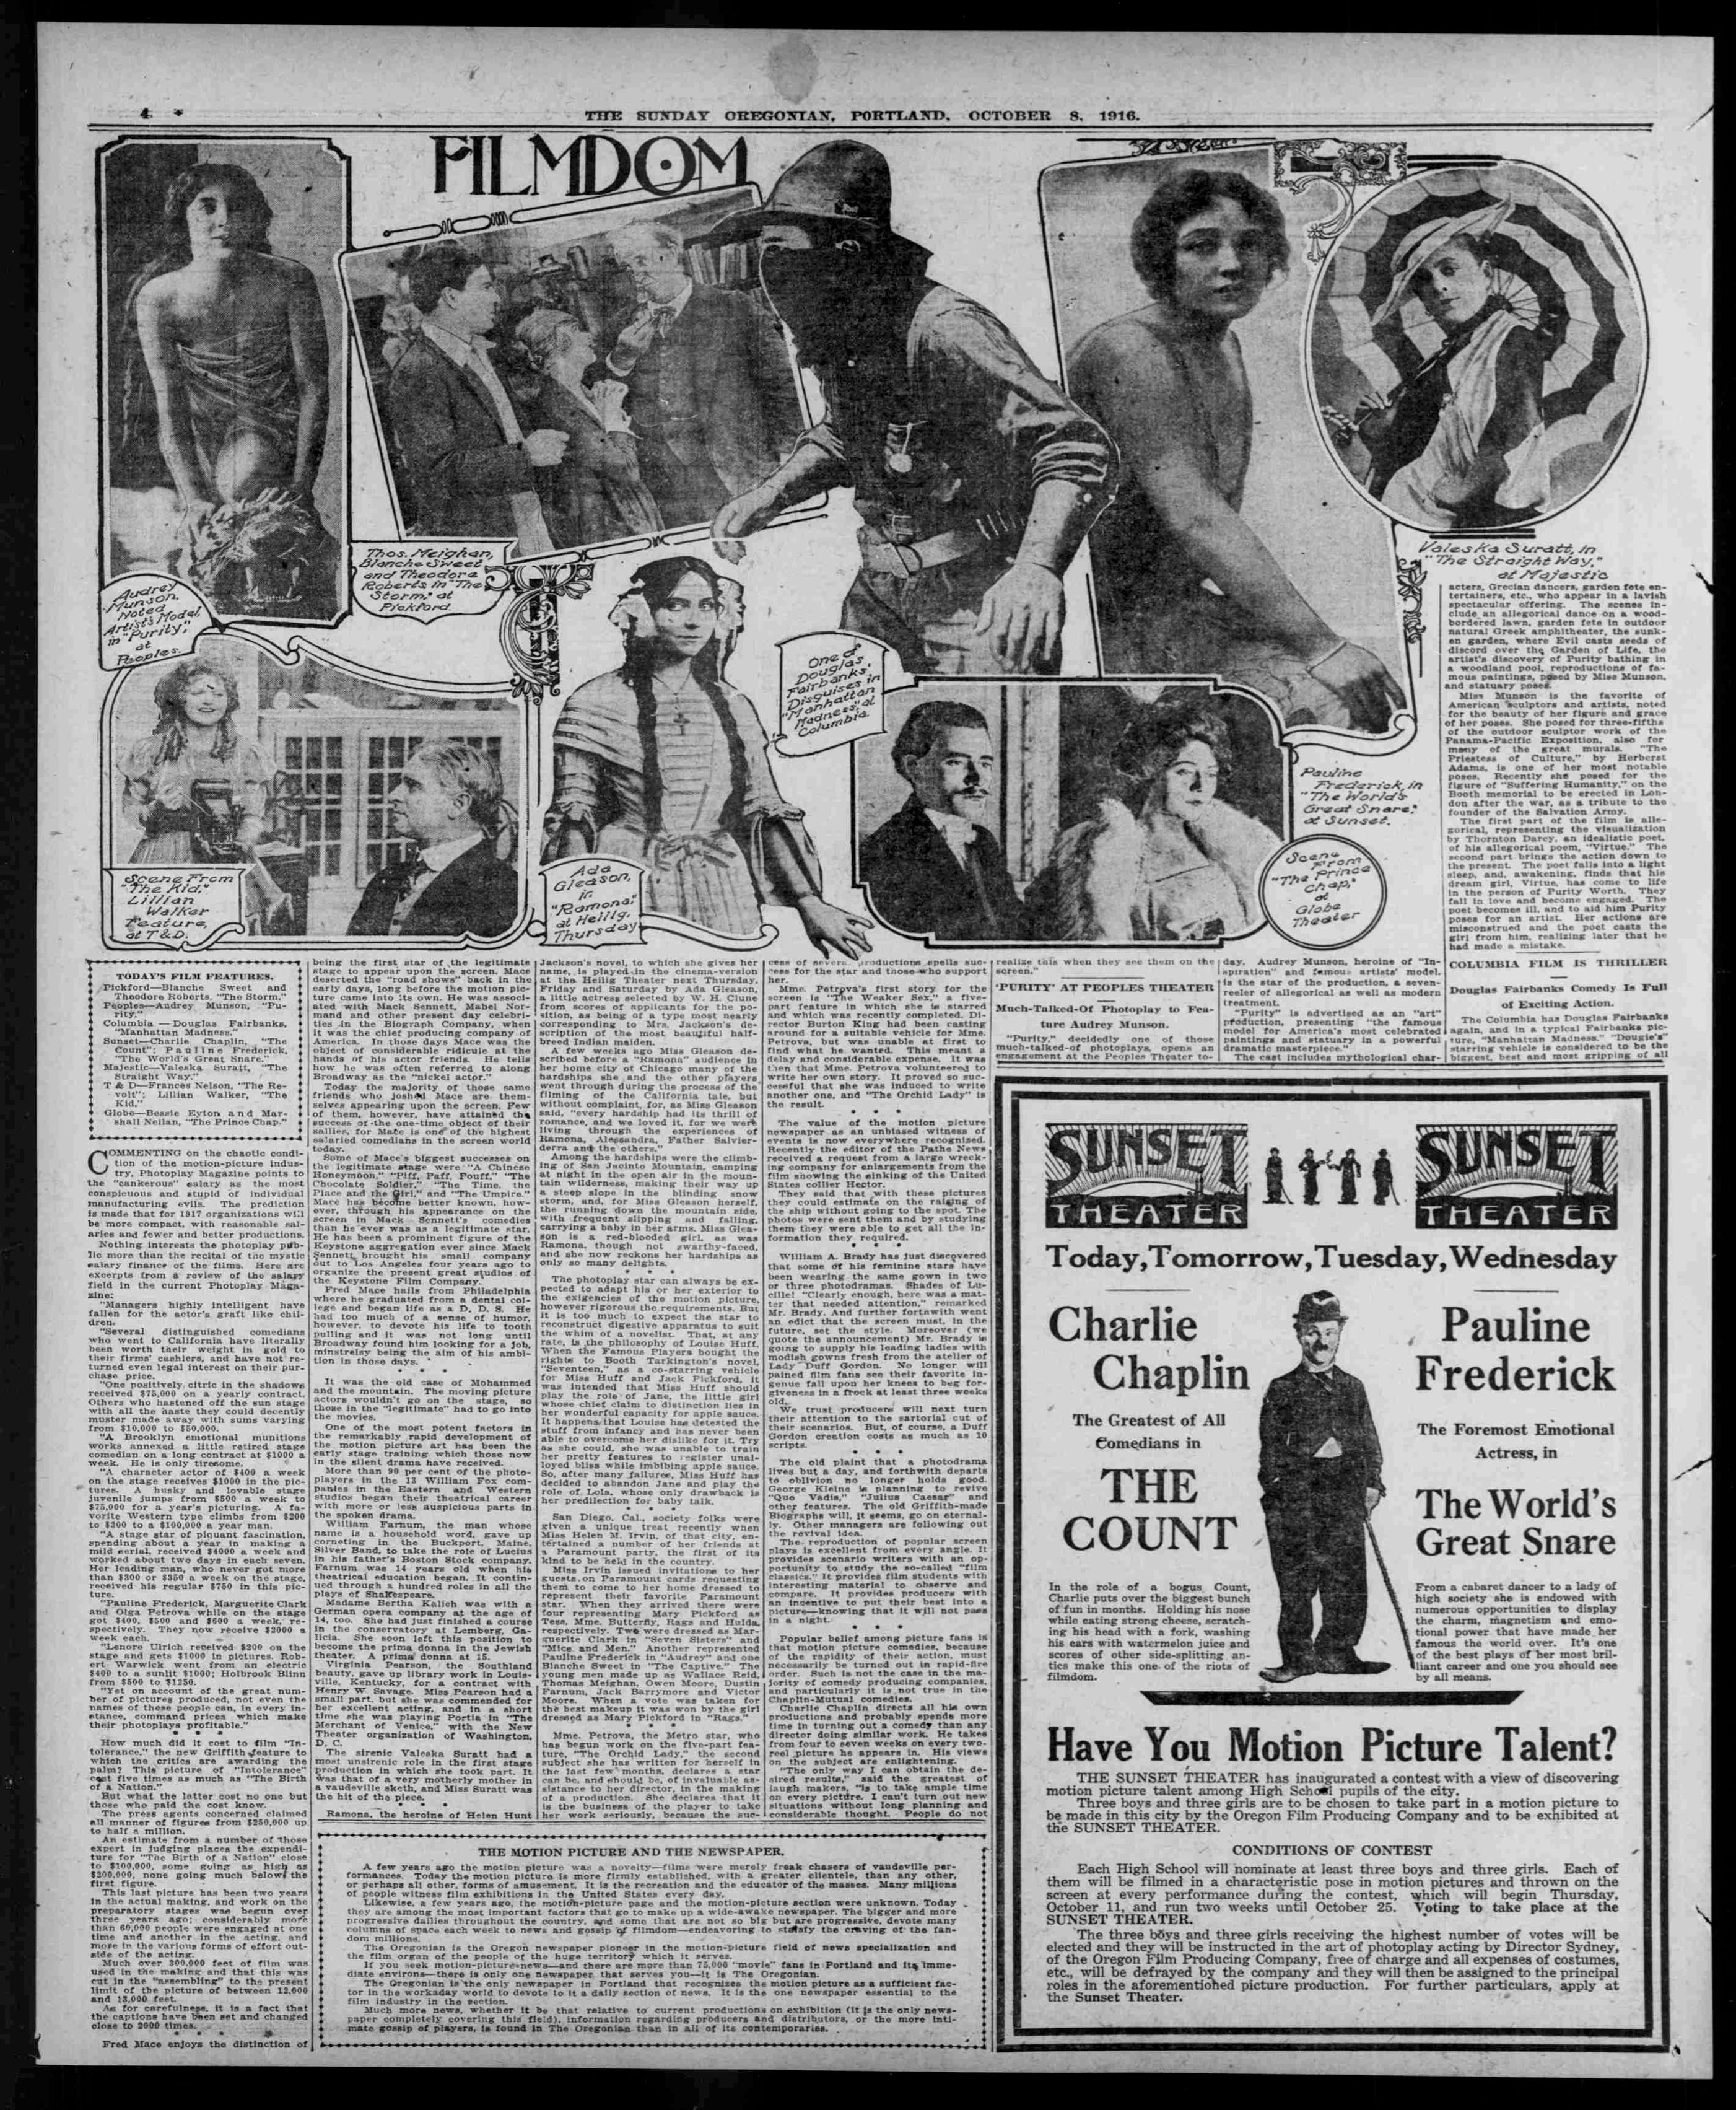 Sunday Oregonian, Oct. 8, 1916, page 4 full page